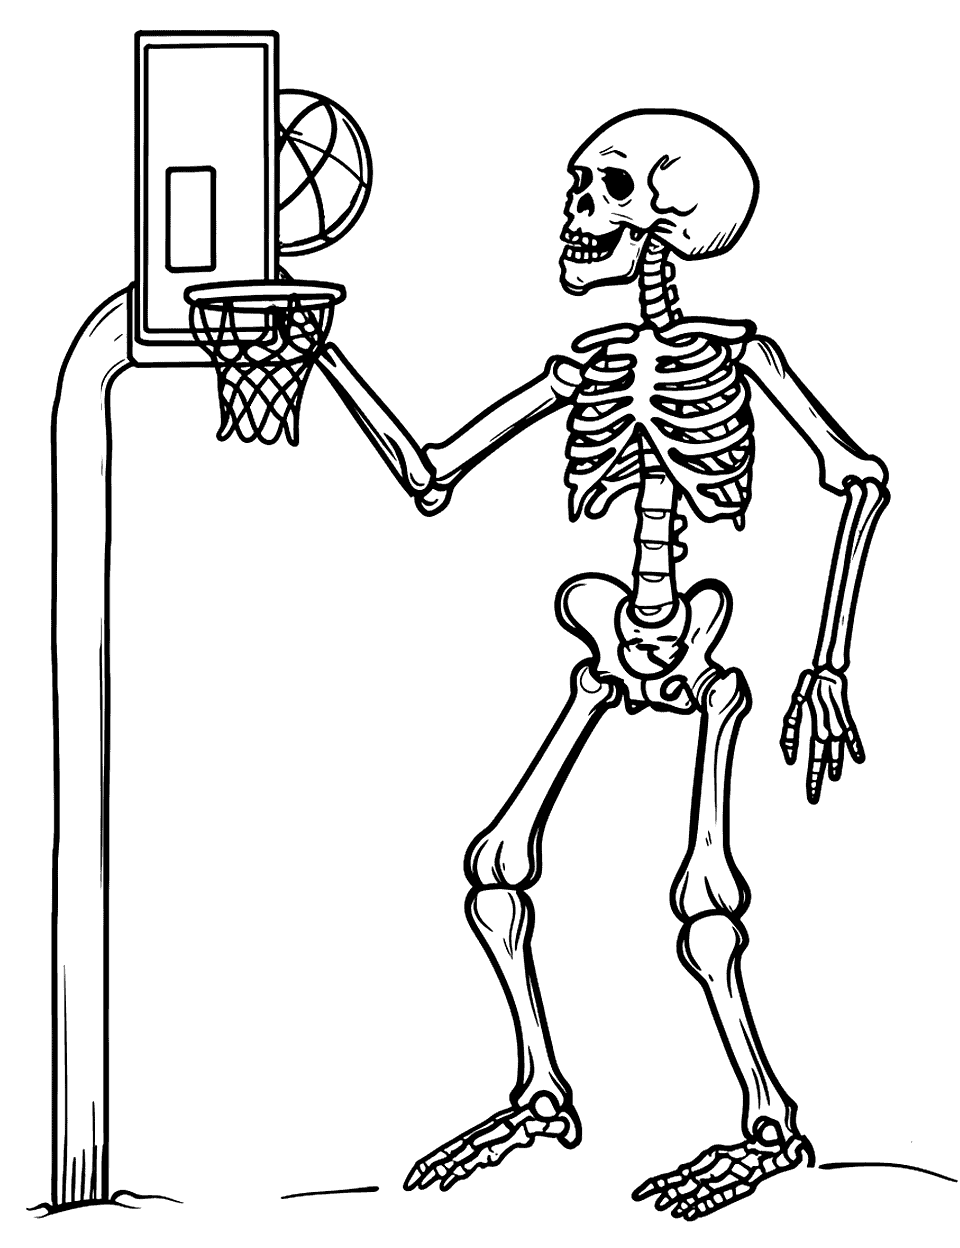 Skeleton Playing Basketball Coloring Page - A skeleton shooting a basketball into a hoop, showing movement and fun.